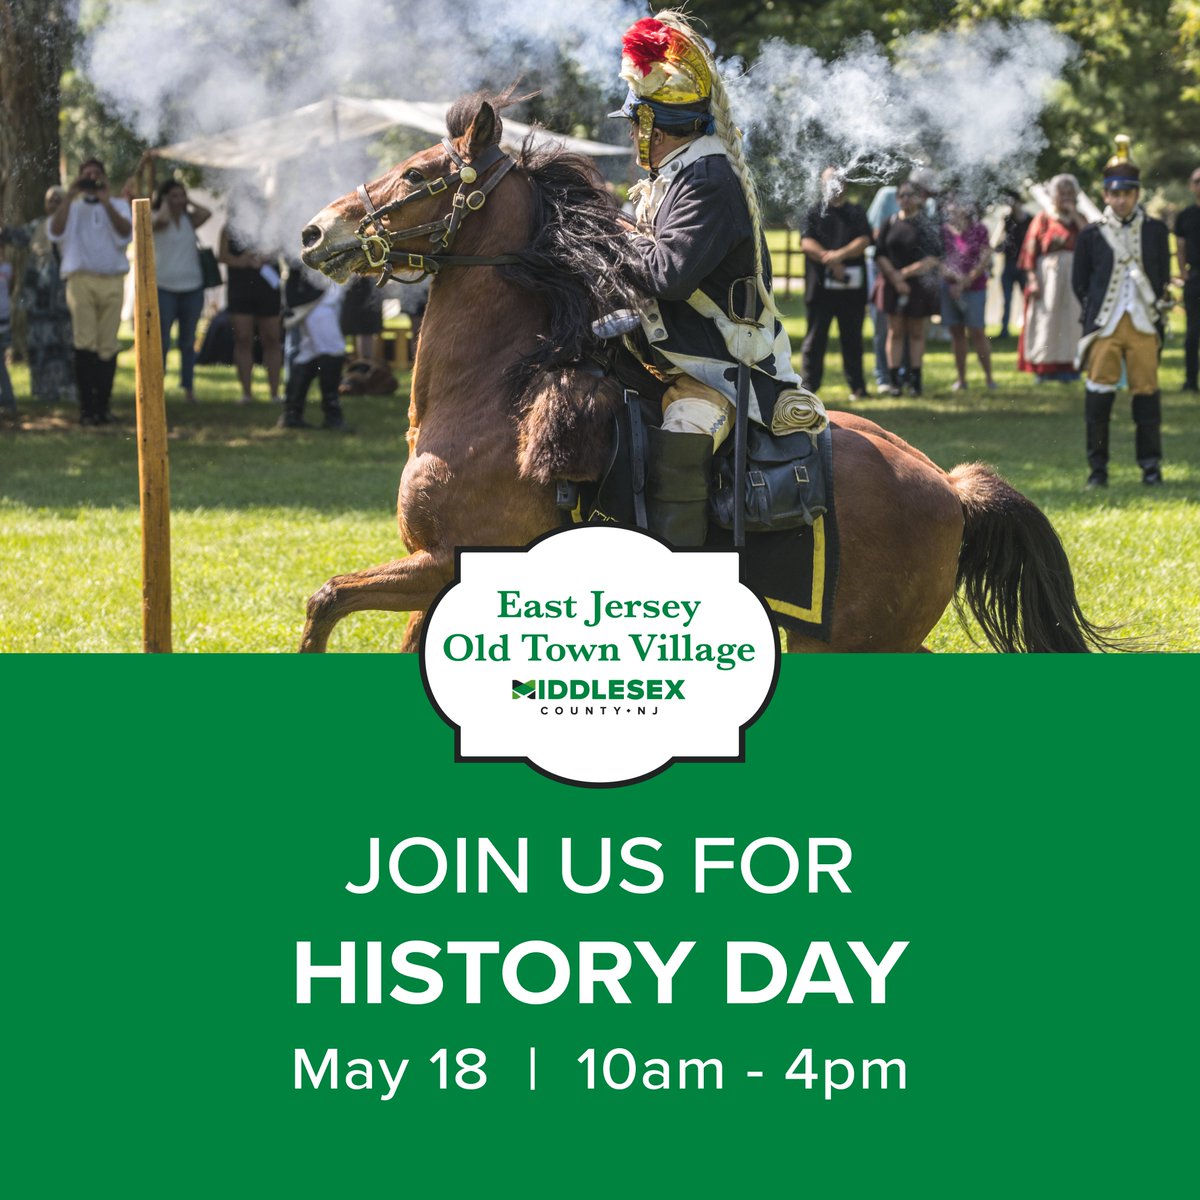 Are you the #historybuff in your family or group of friends? Or the student who reads up on the past even when you’re not in class? Then you won’t want to miss History Day us at East Jersey Old Town Village! For more info, visit: bit.ly/3JW6JHu #FamilyEvent #FreeEvent